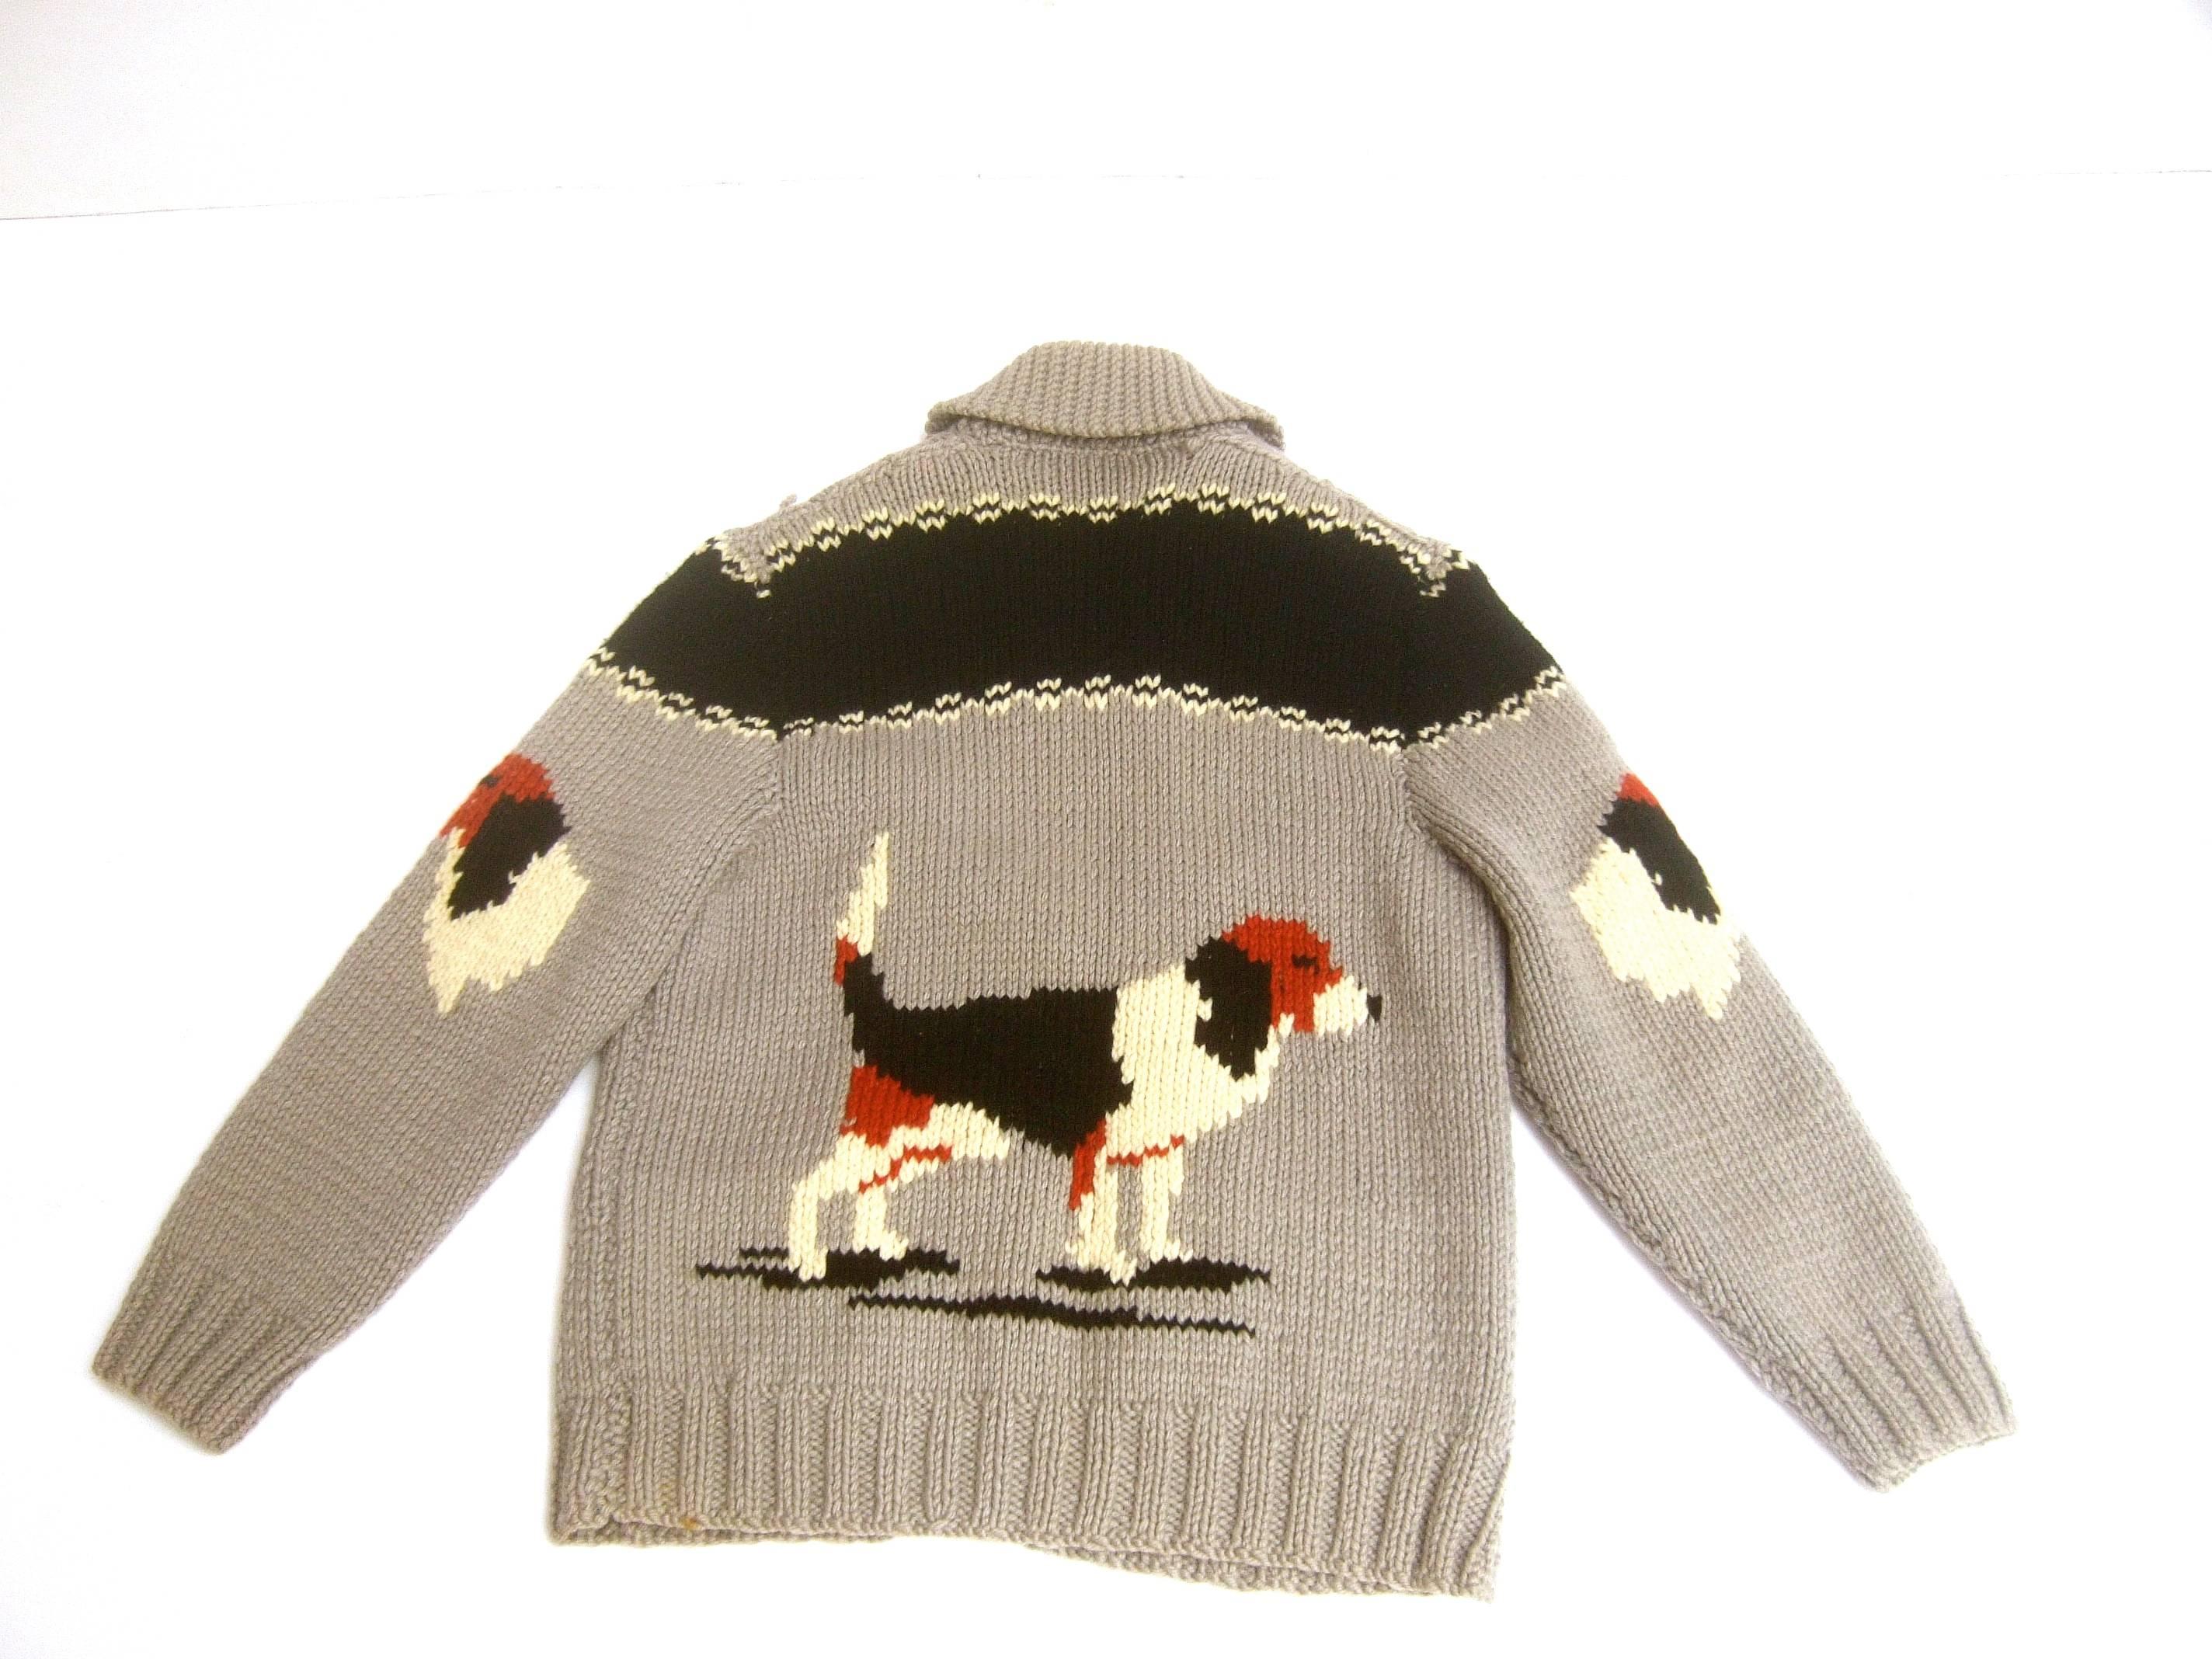 1940s Men's dog theme wool hand knit zippered sweater
The unique wool hand knit midcentury cardigan sweater 
is illustrated with a pair of spaniels on the front

The sleeves and back side also depict spaniels 
The heavy gauge wool hand knit cardigan